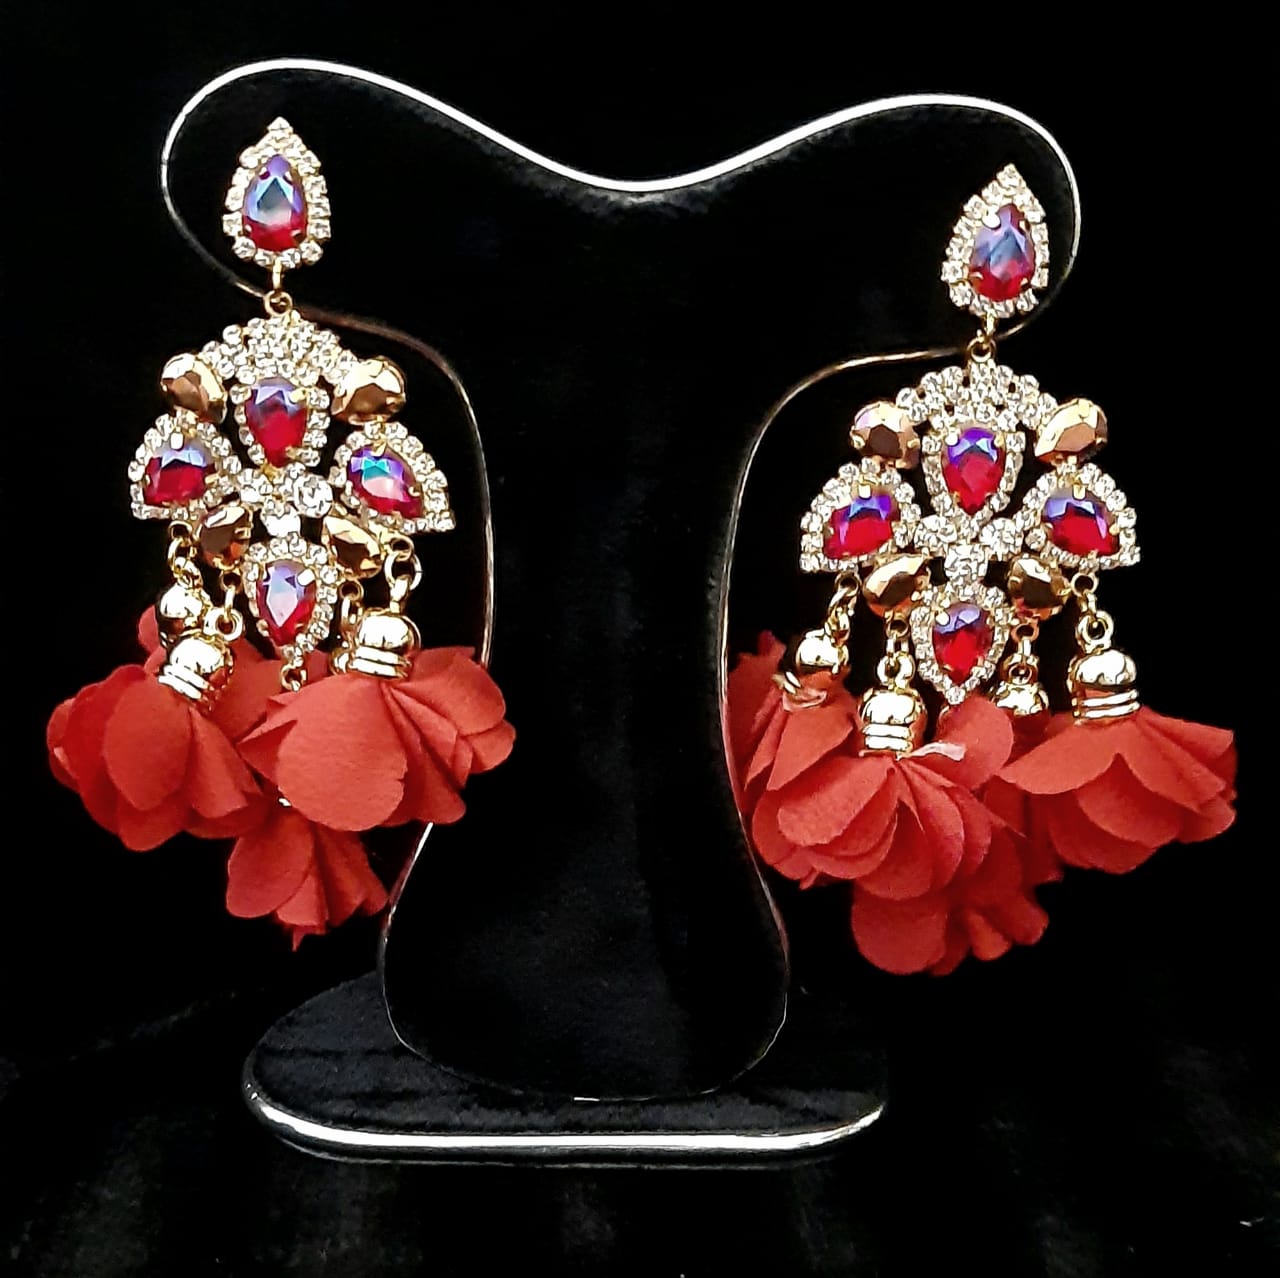 Stone Earring Designs - Gold, Stone Earrings New Designs for Girls Images, Pictures - kaner dul - NeotericIT.com